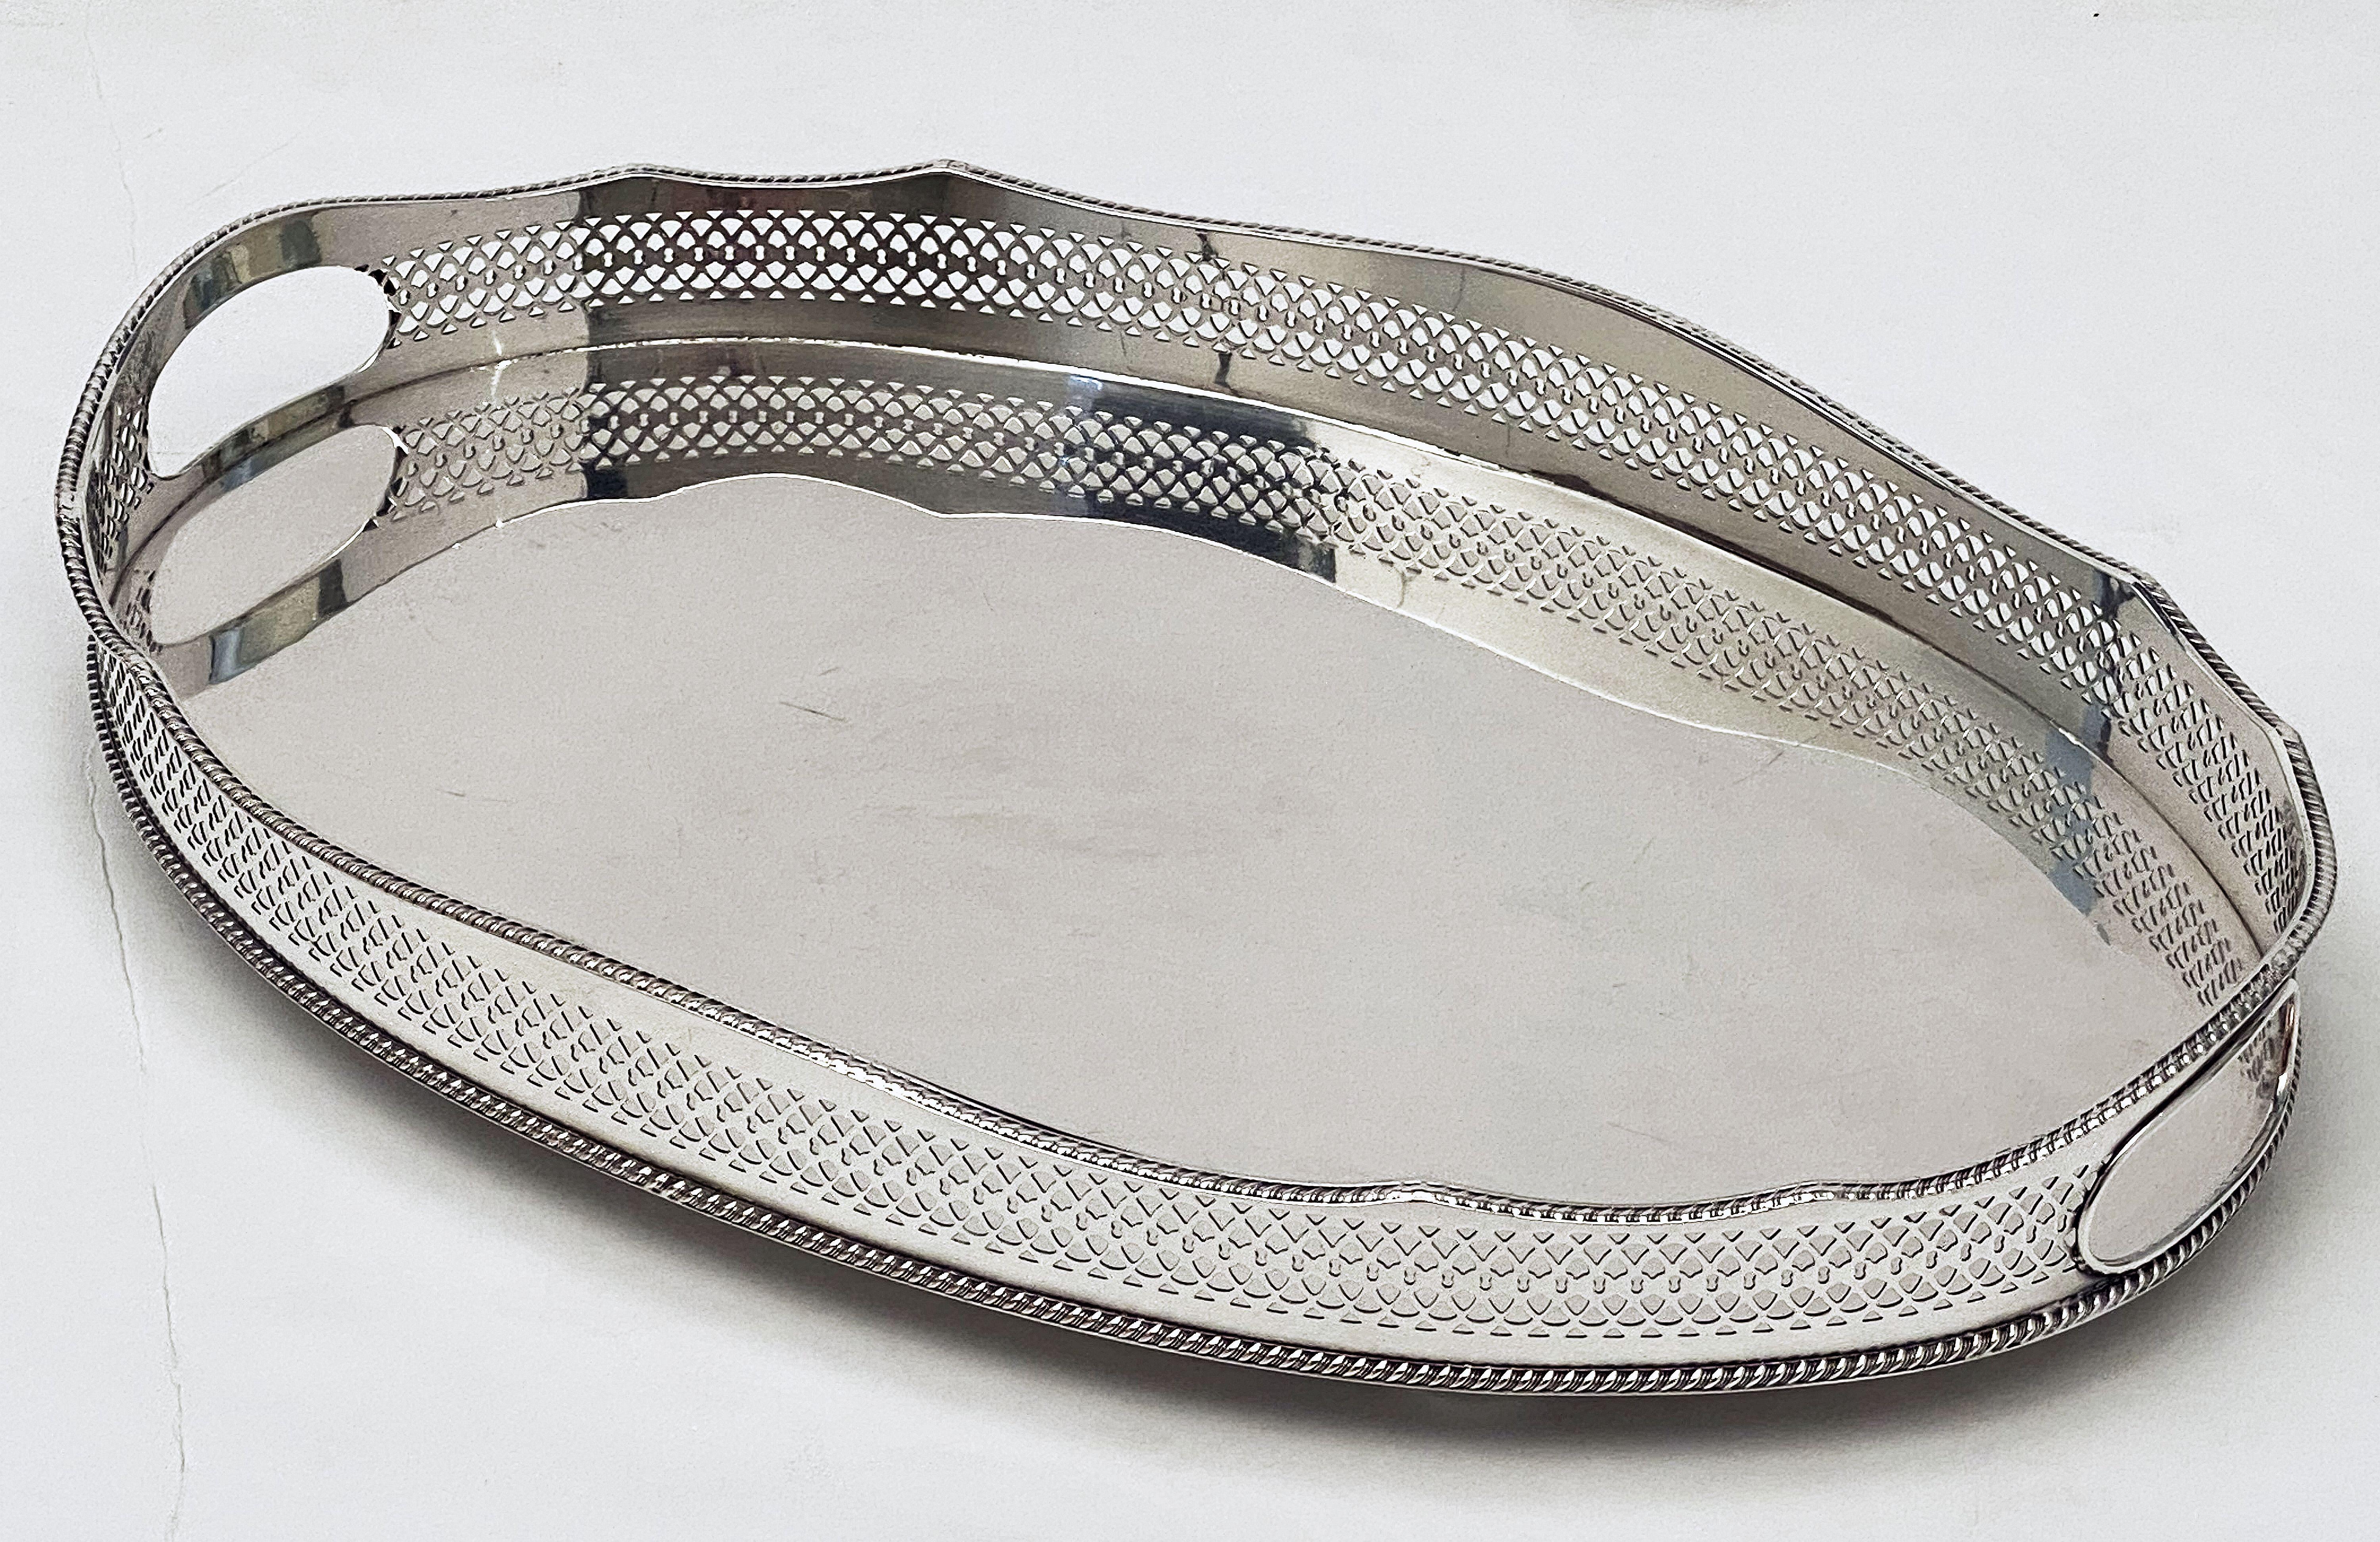 Pair of English Silver Oval Gallery Serving or Drinks Trays 'Priced as a Pair' 8